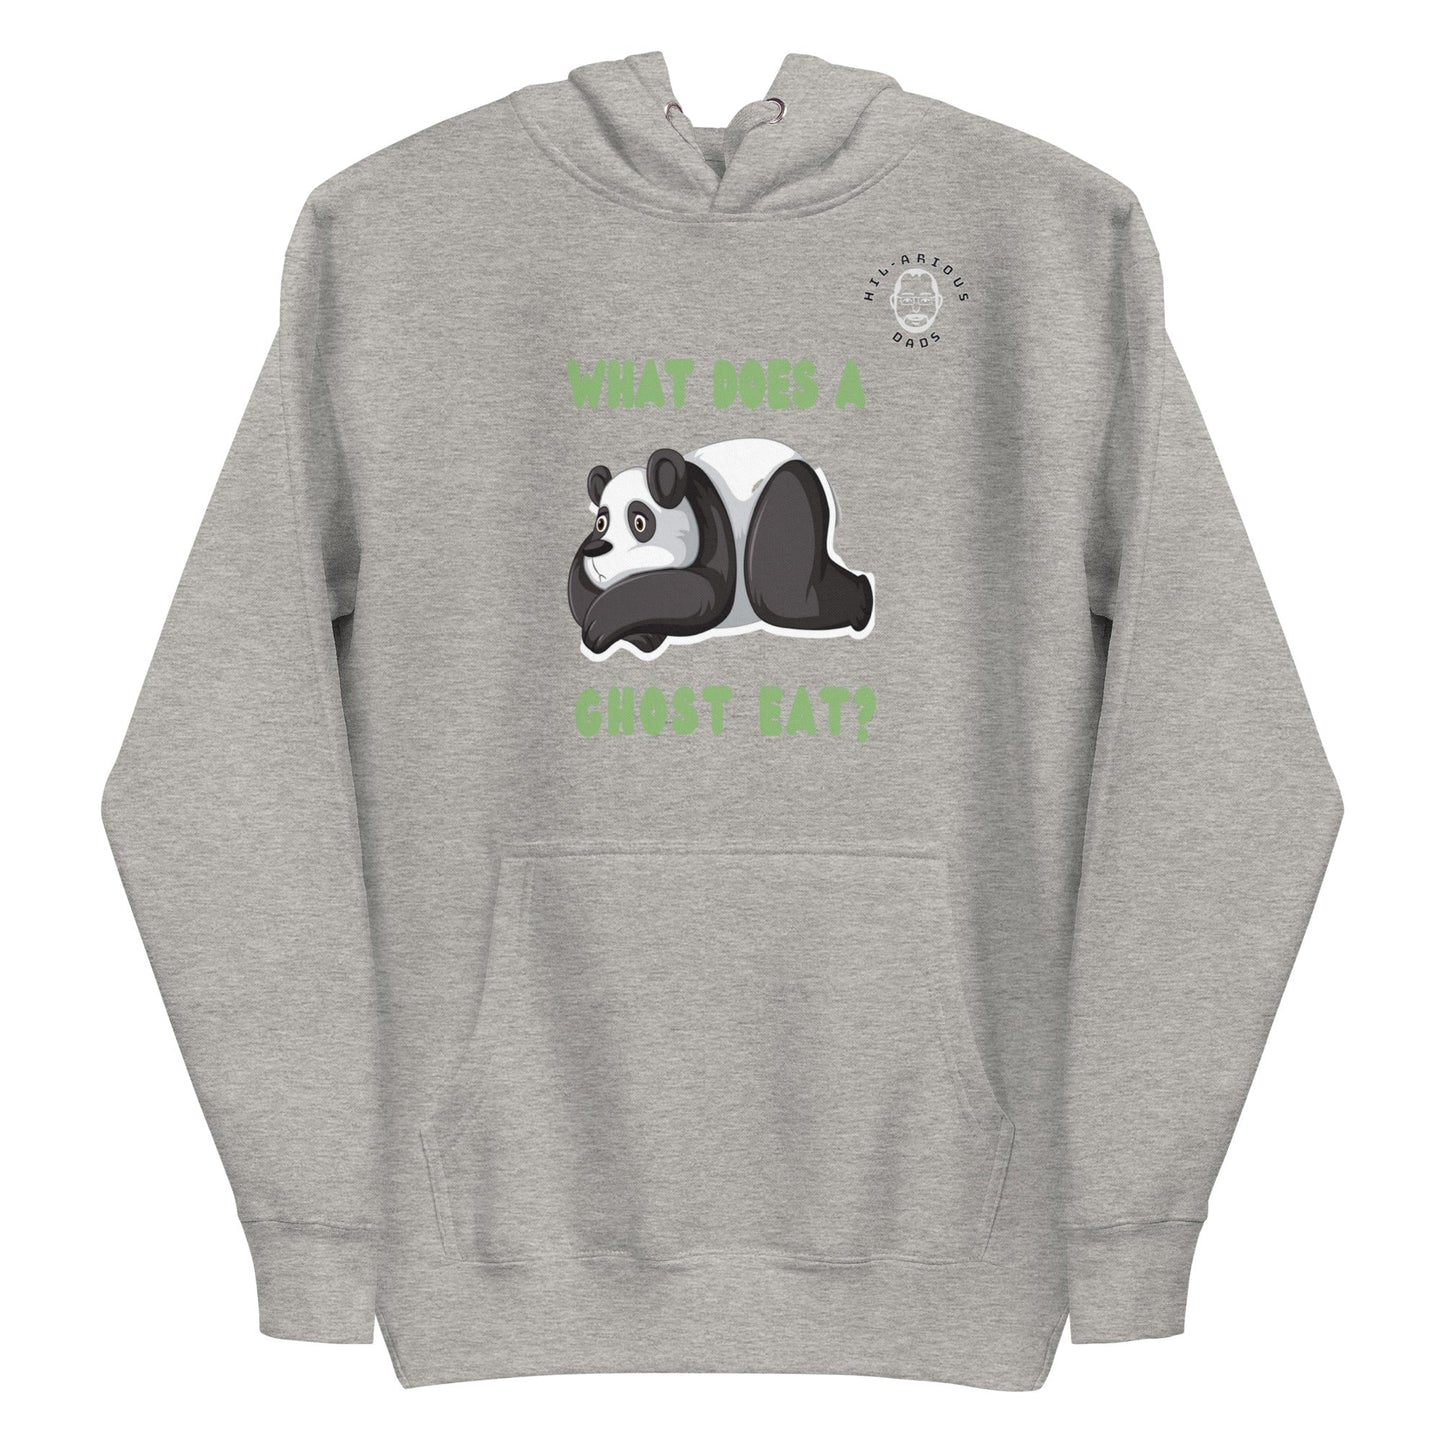 What does a panda ghost eat?-Hoodie - Hil-arious Dads